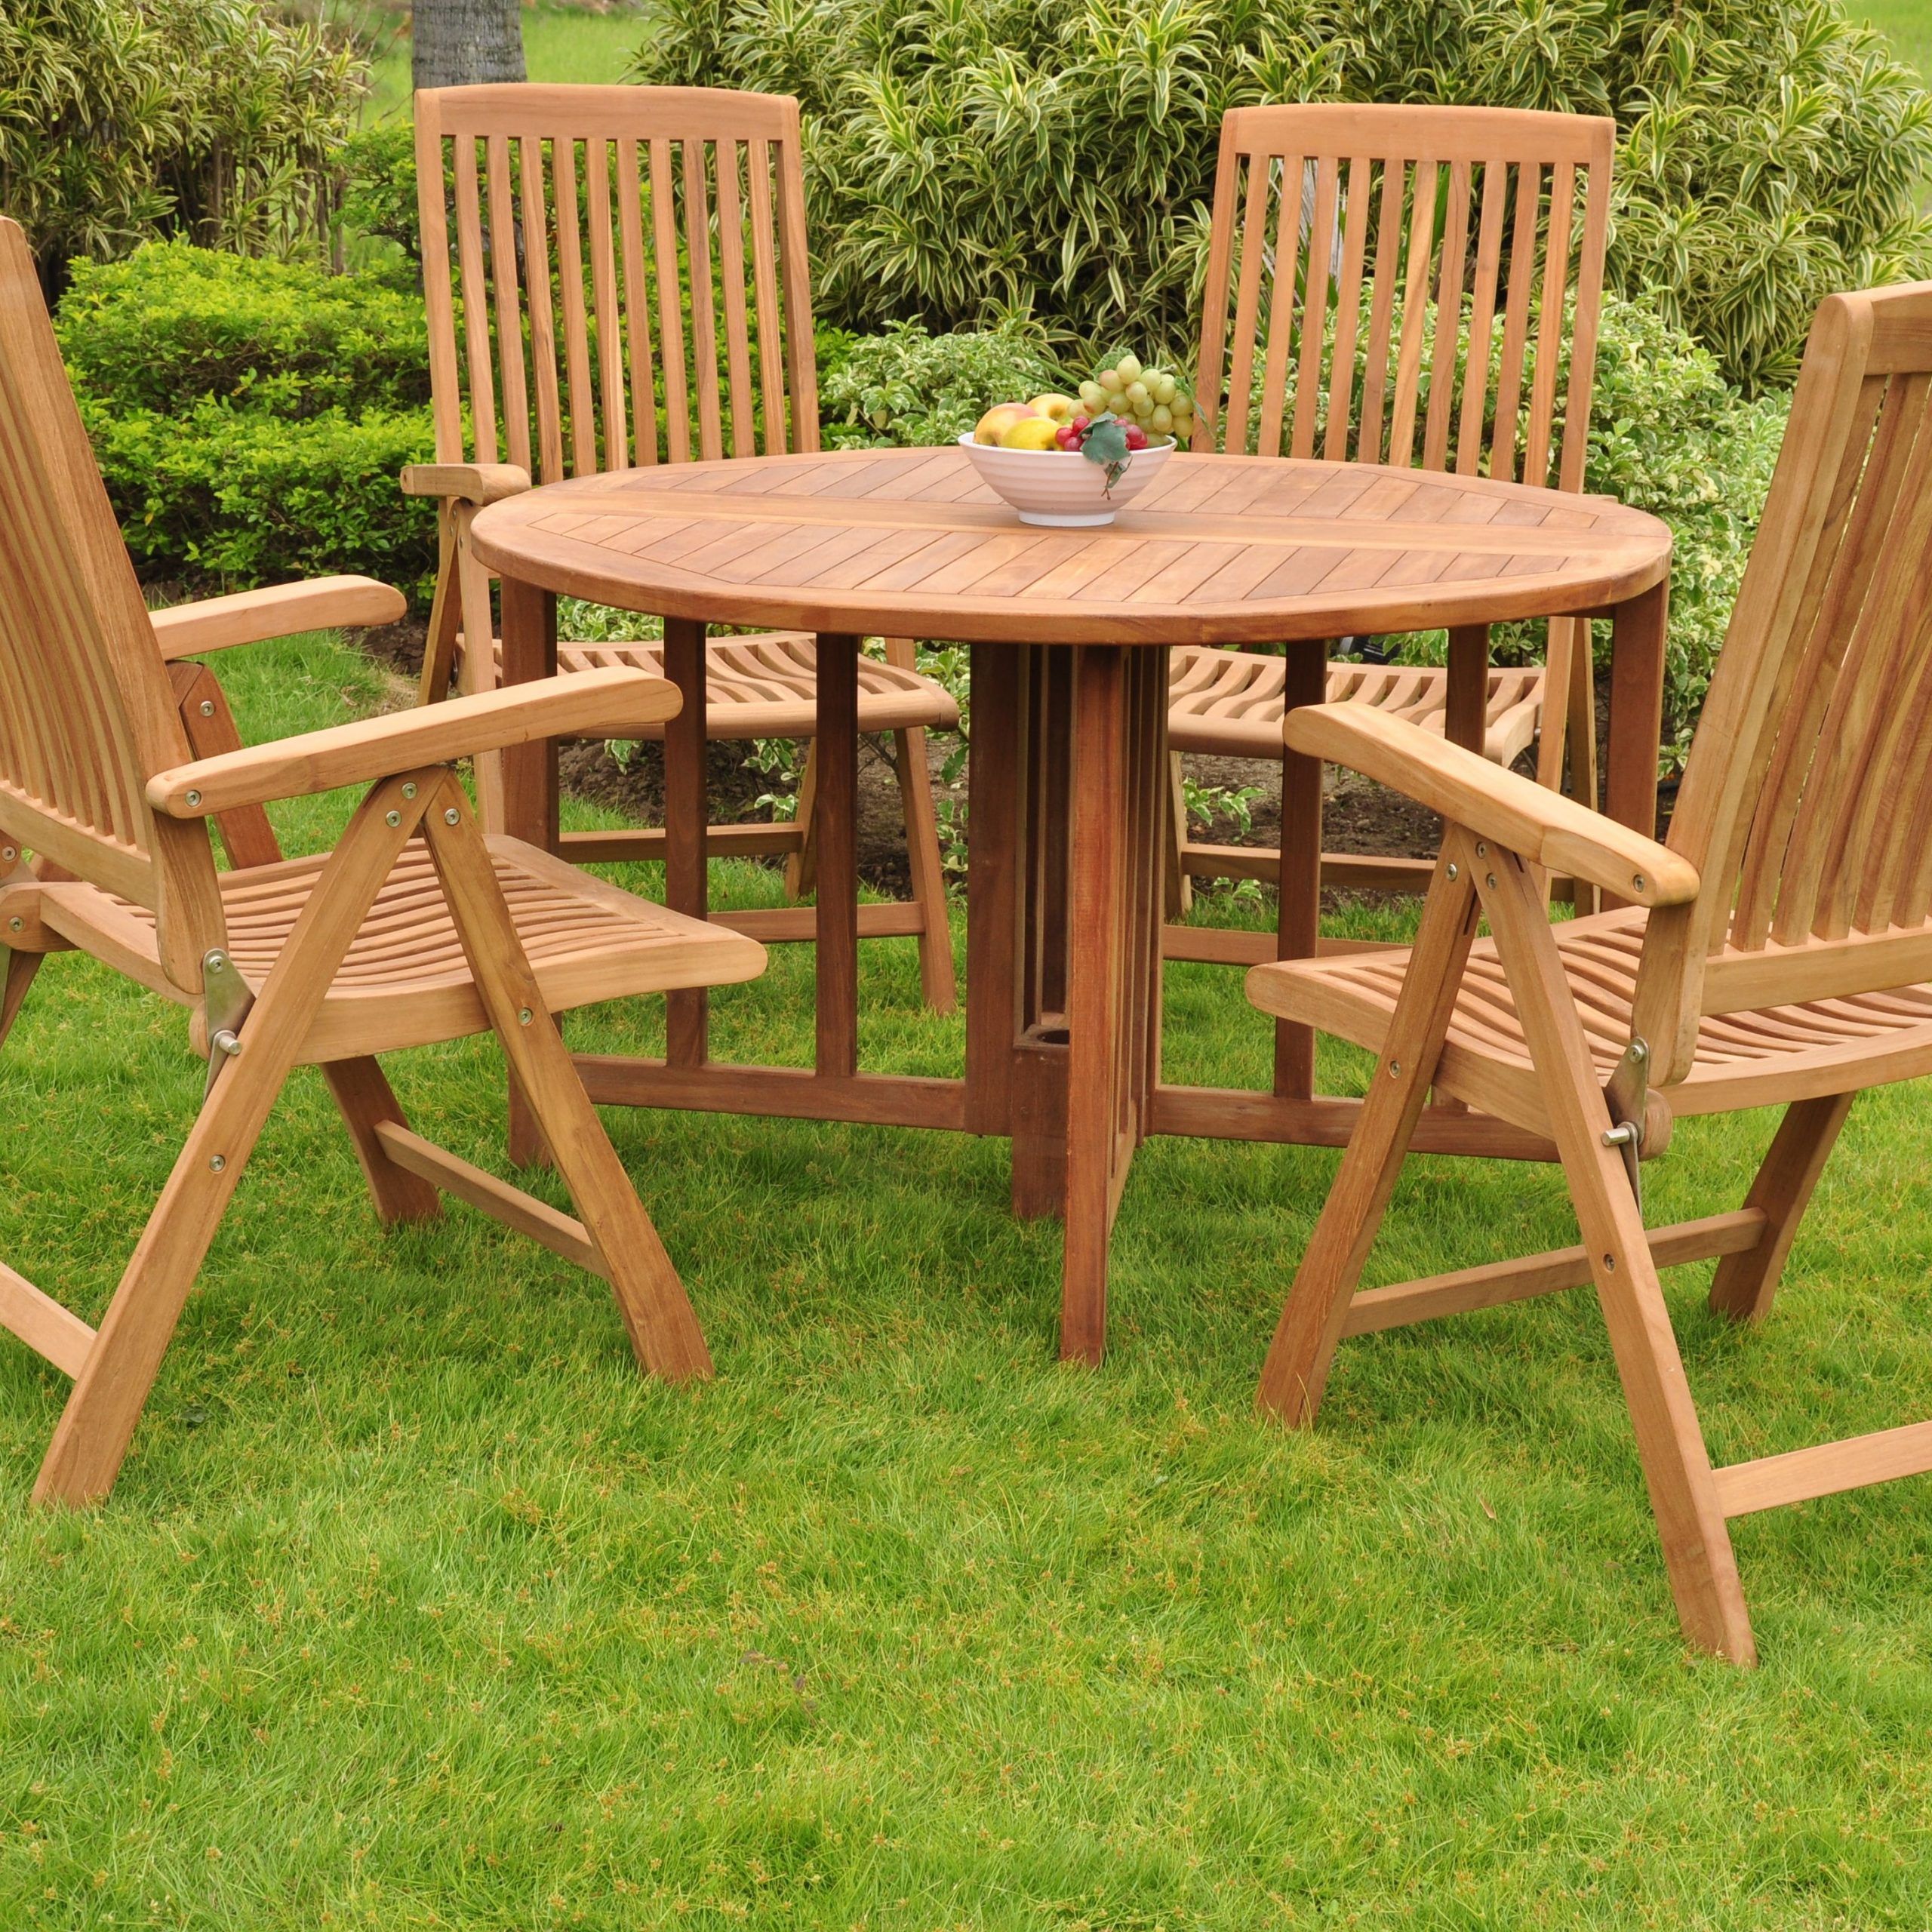 Teak Dining Set:4 Seater 5 Pc – 48" Round Table And 4 Marley Reclining In Teak Folding Chair Patio Dining Sets (View 1 of 15)